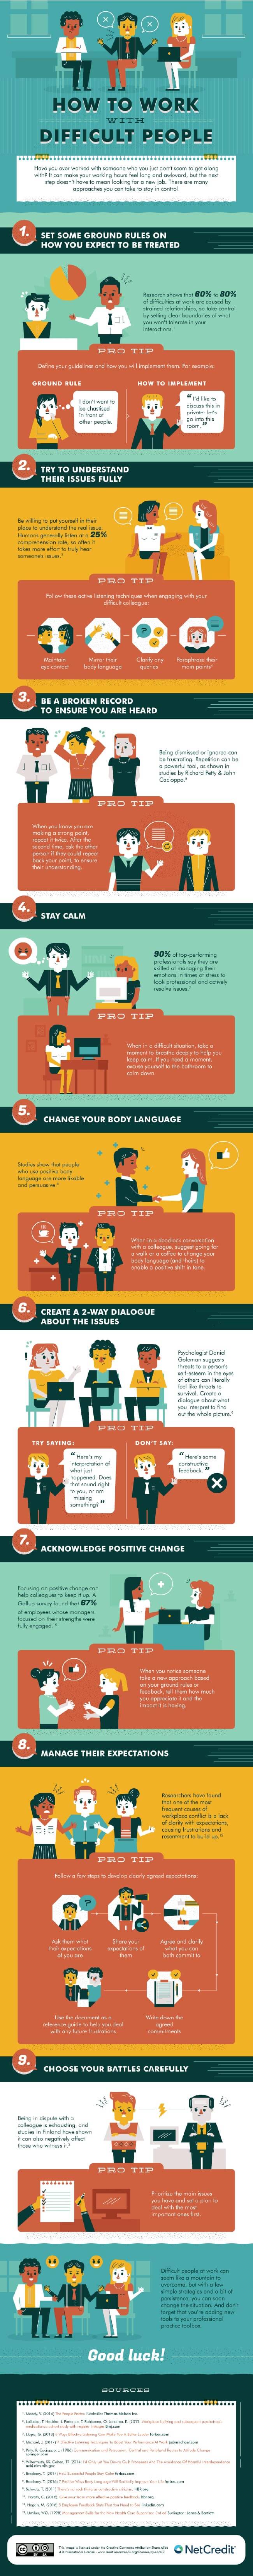 9 effective ways to work with difficult people and win their trust tipsographic main